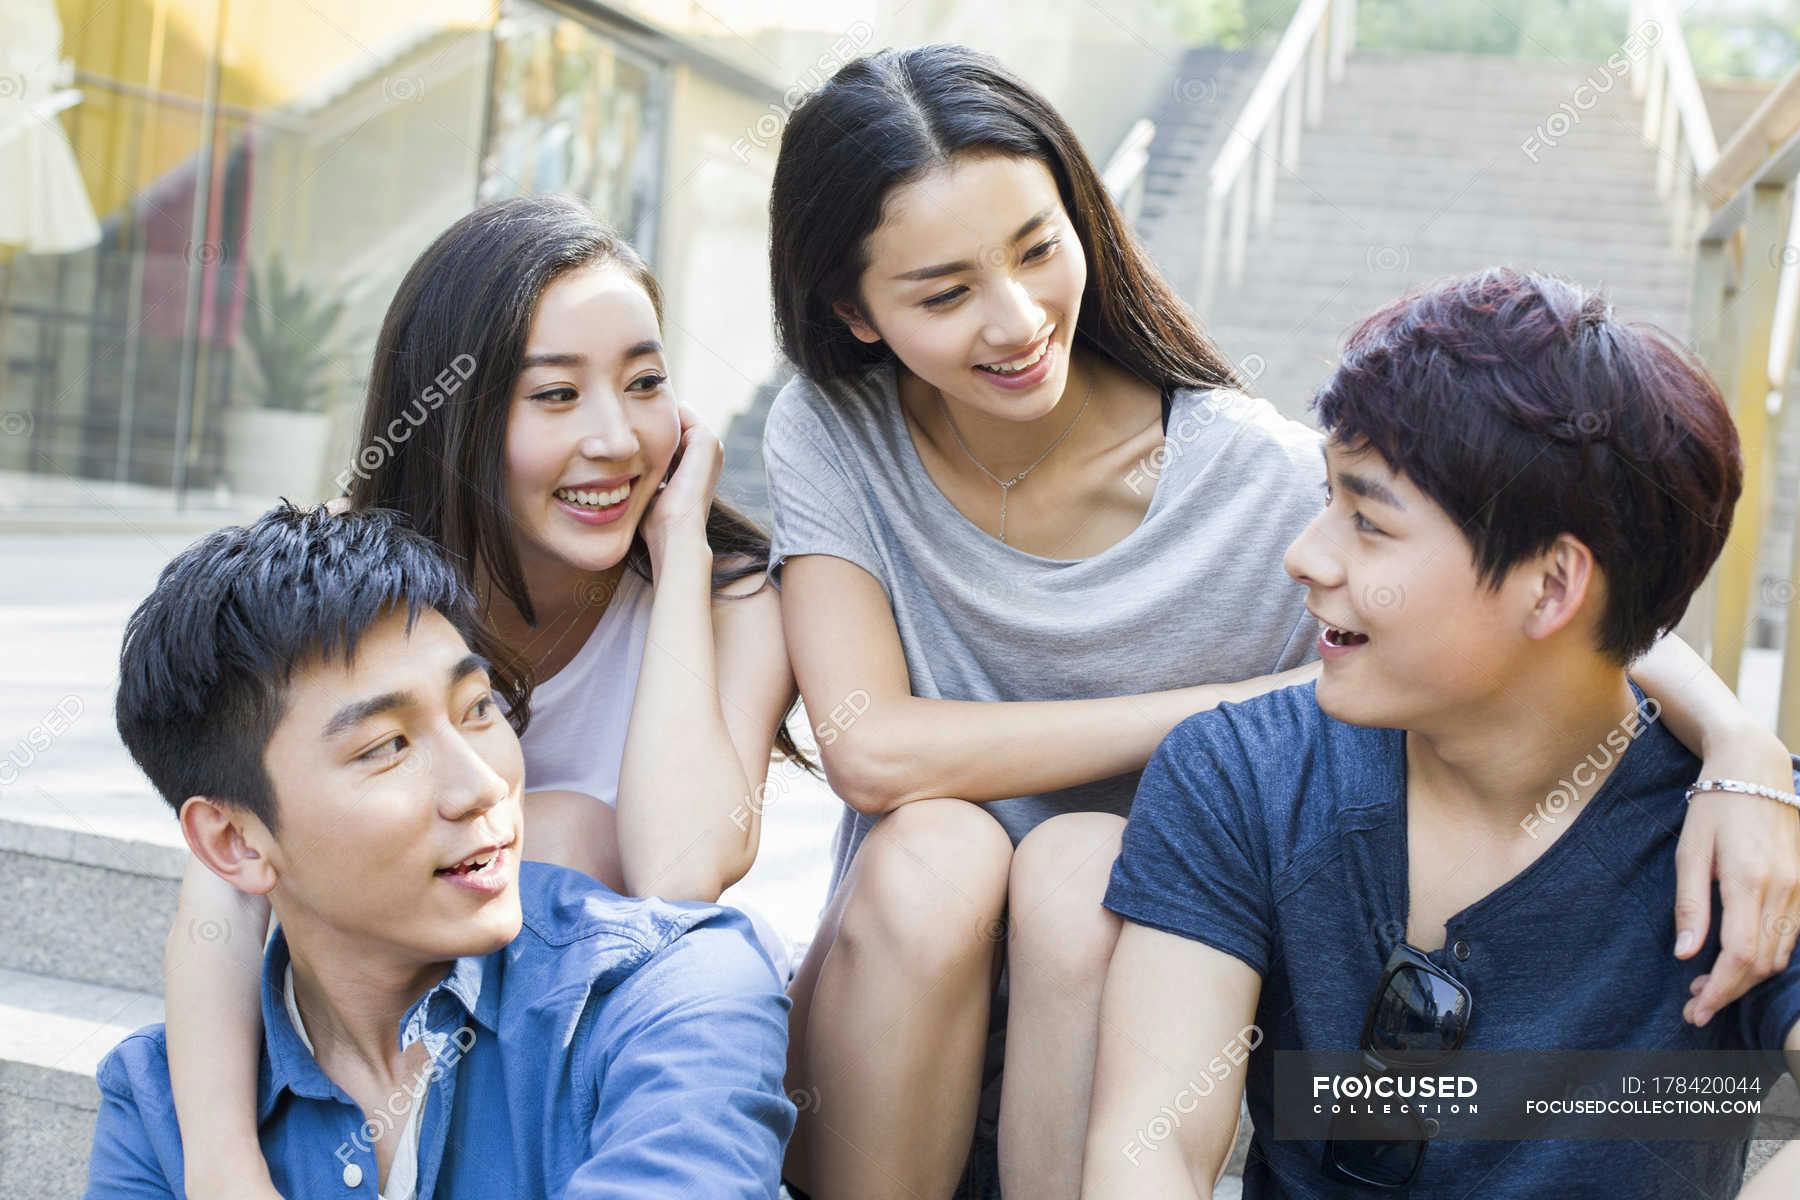 focused_178420044-stock-photo-chinese-friends-talking-together-stairs.jpg